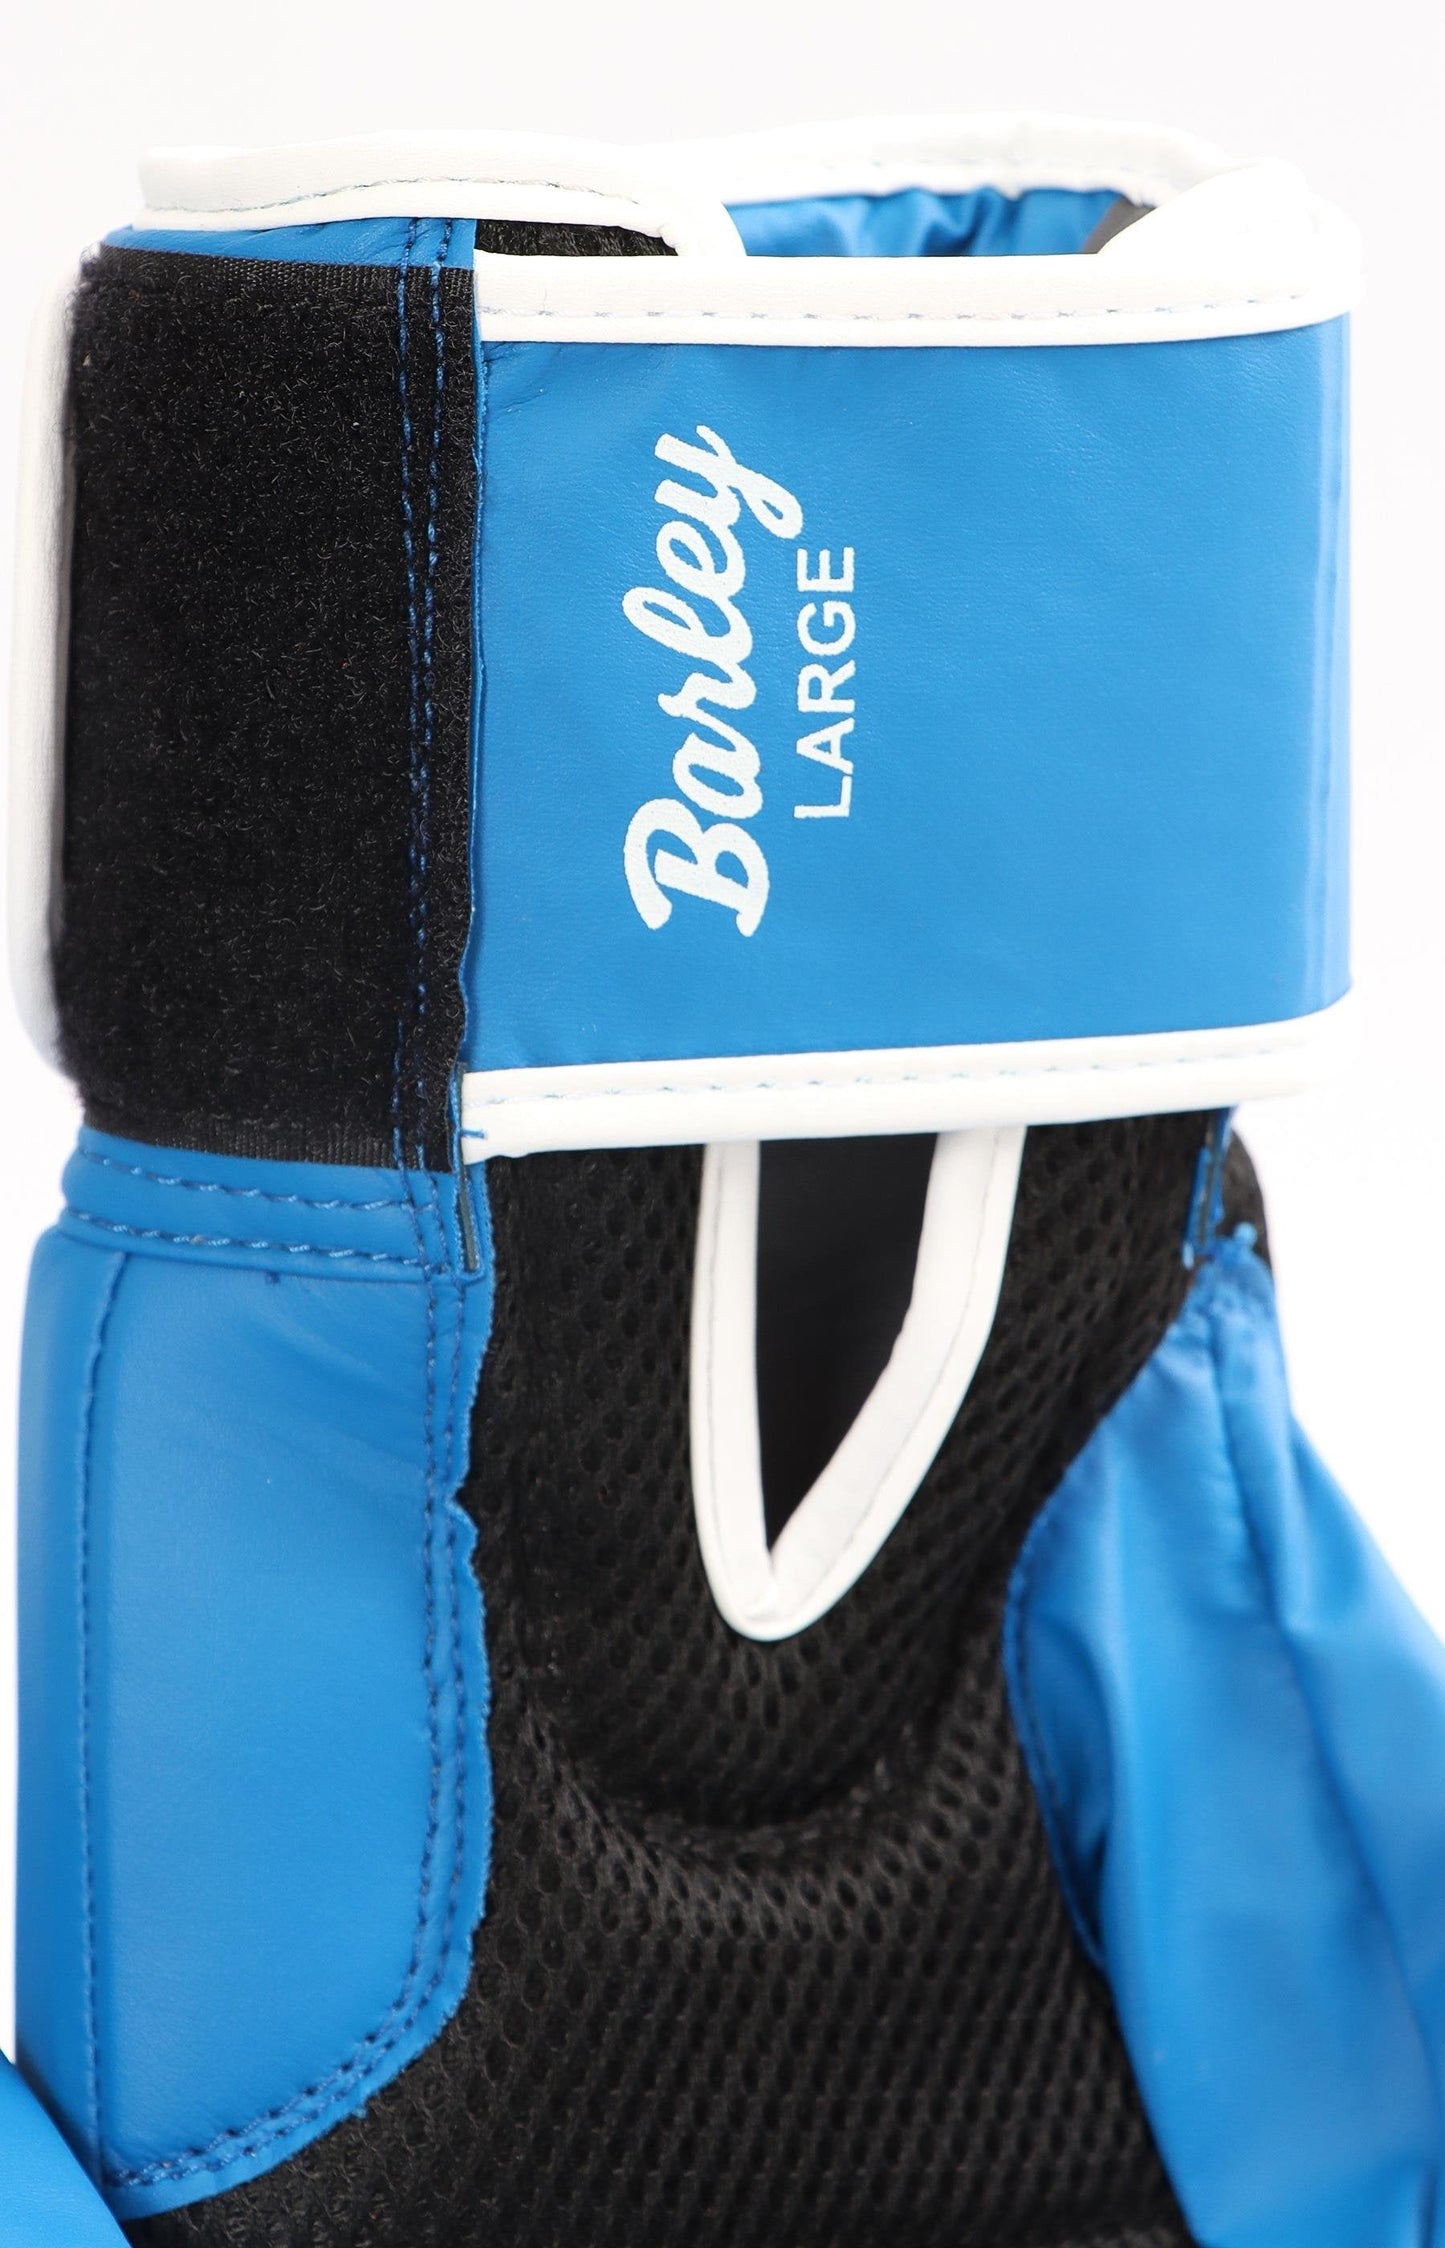 Mens Rookie Bag Mitts - Blue-White